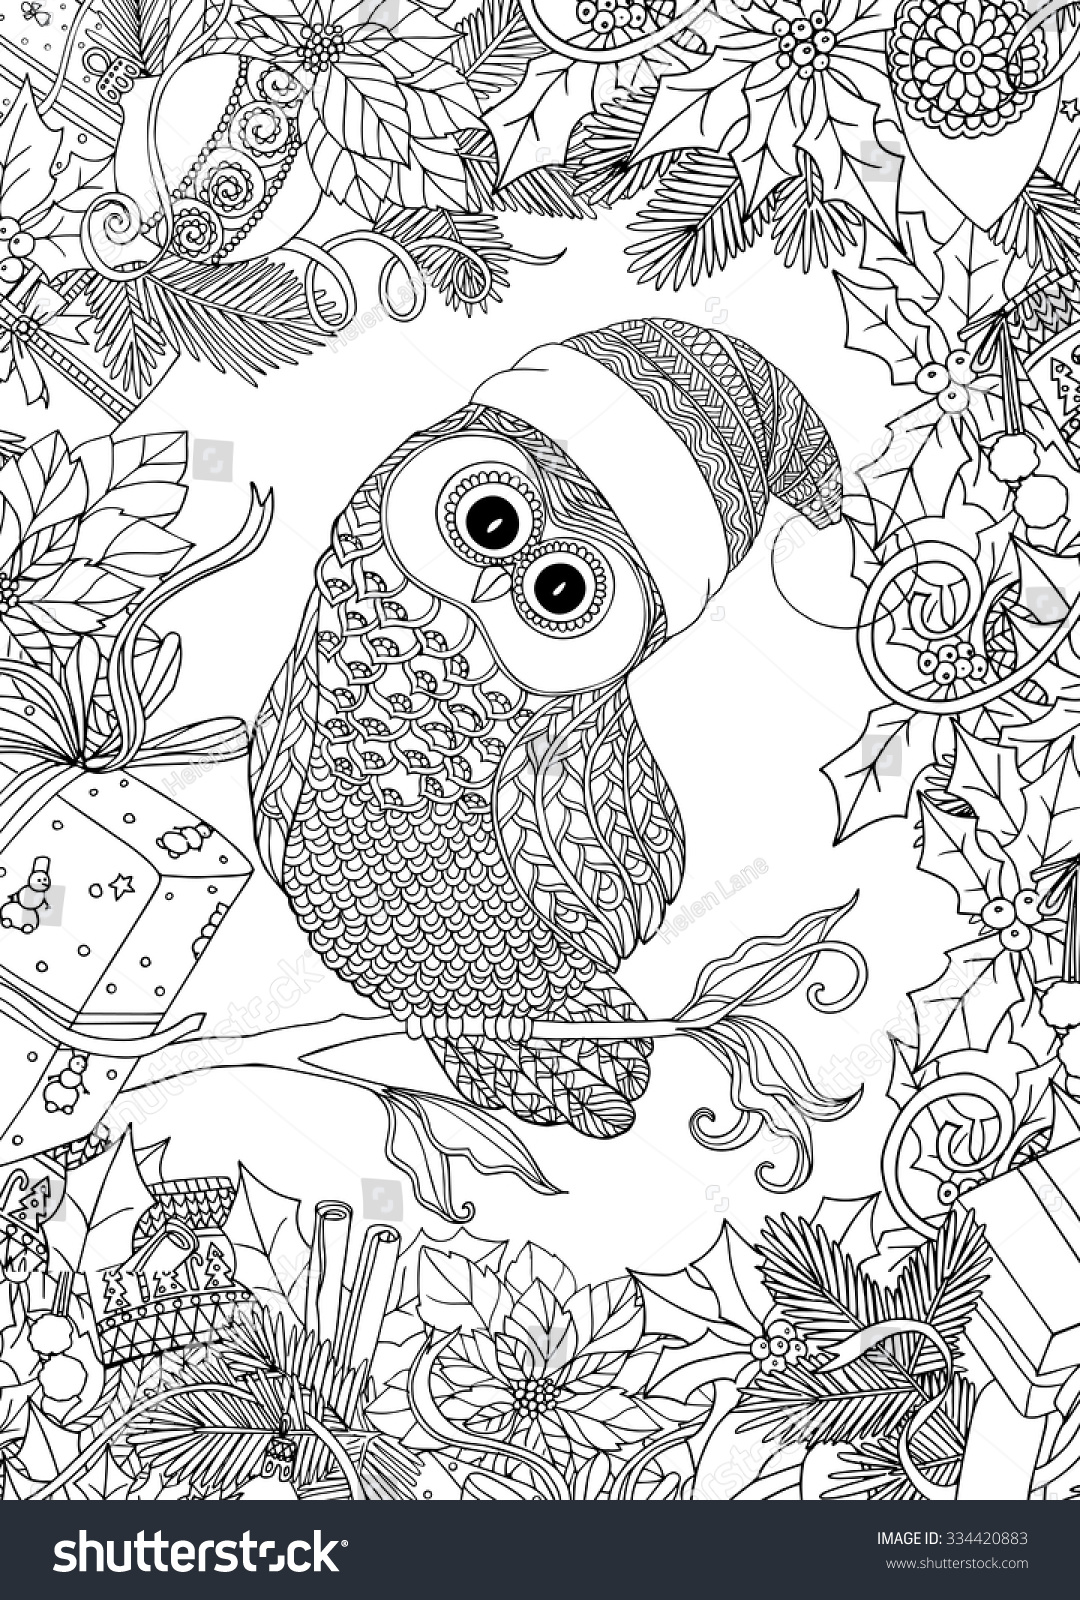 Coloring book for adult and older children Coloring page with cute owl in Santa Claus